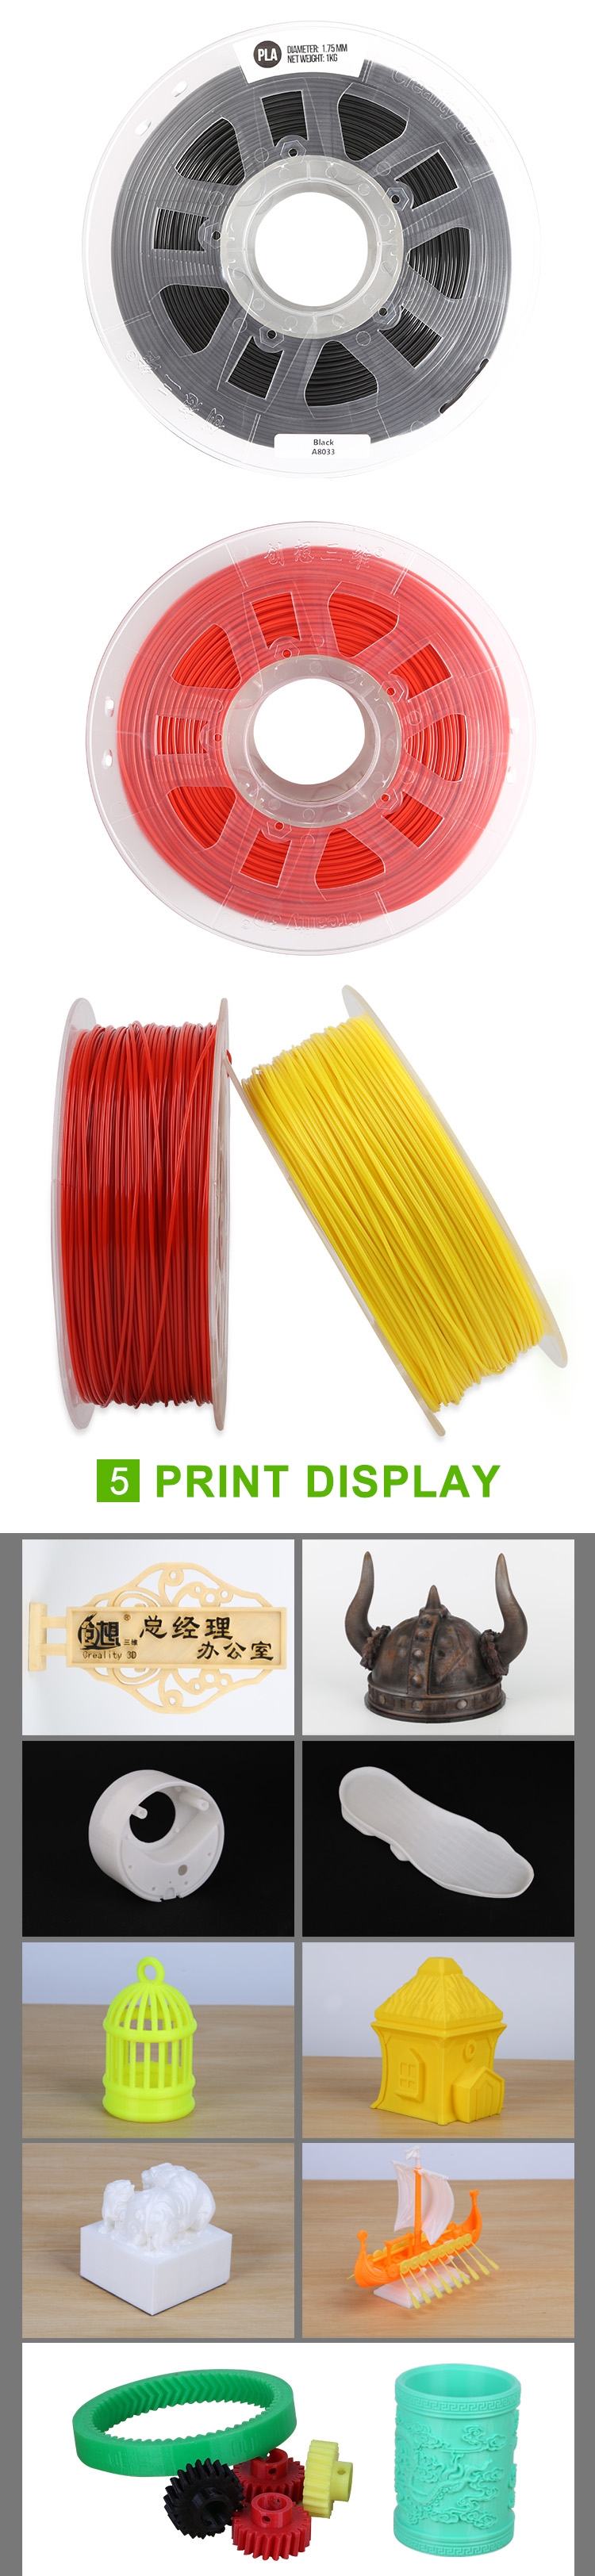 Creality 3D® White/Black/Yellow/Blue/Red 1KG 1.75mm PLA Filament For 3D Printer 14